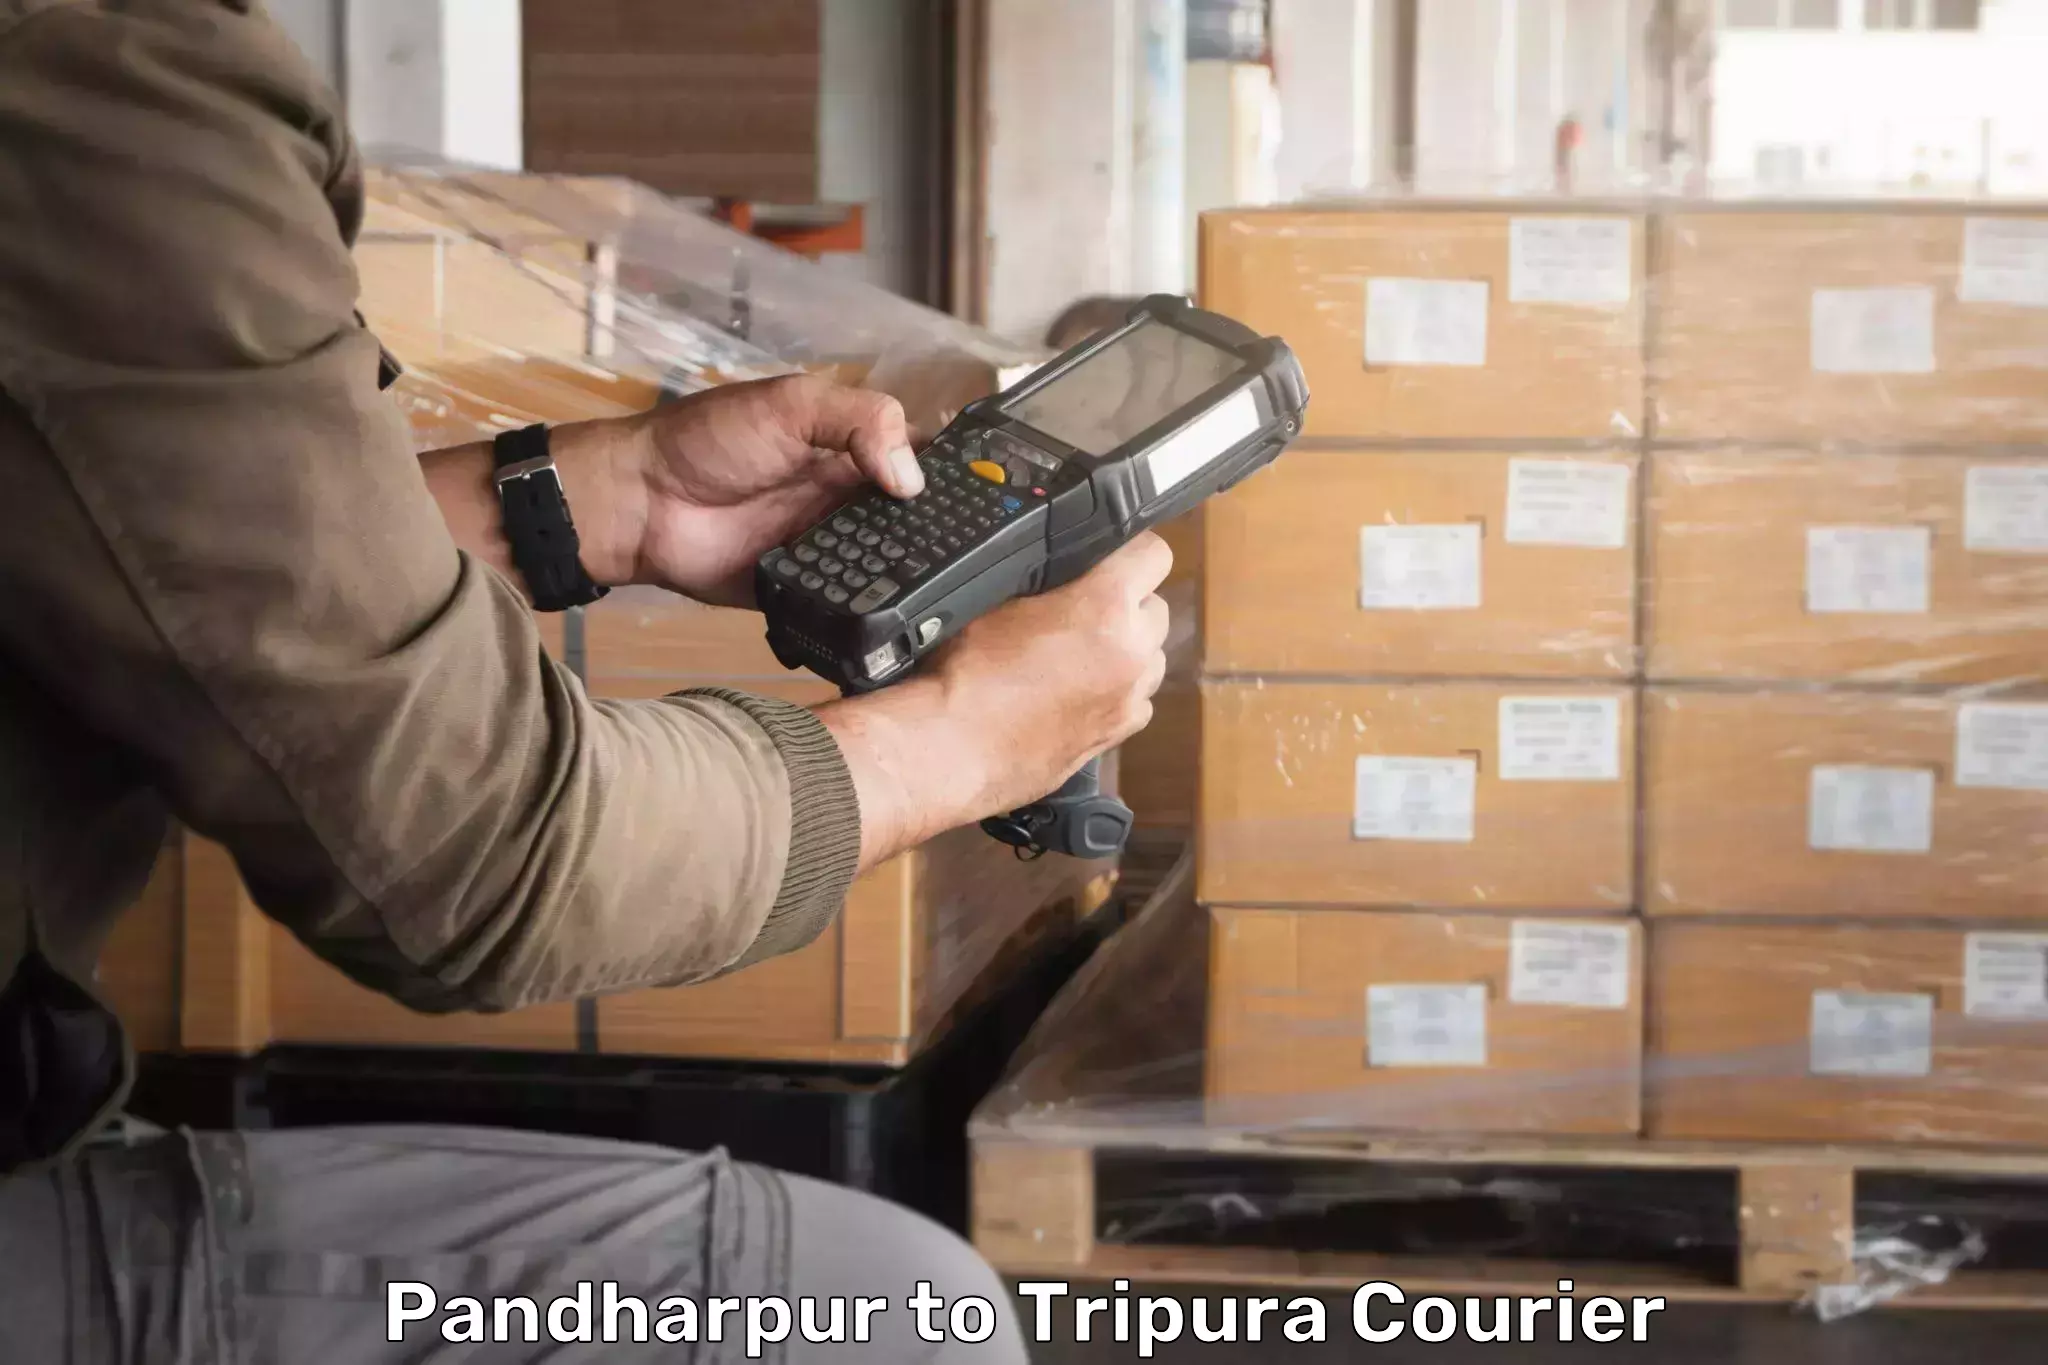 24-hour courier service in Pandharpur to Agartala